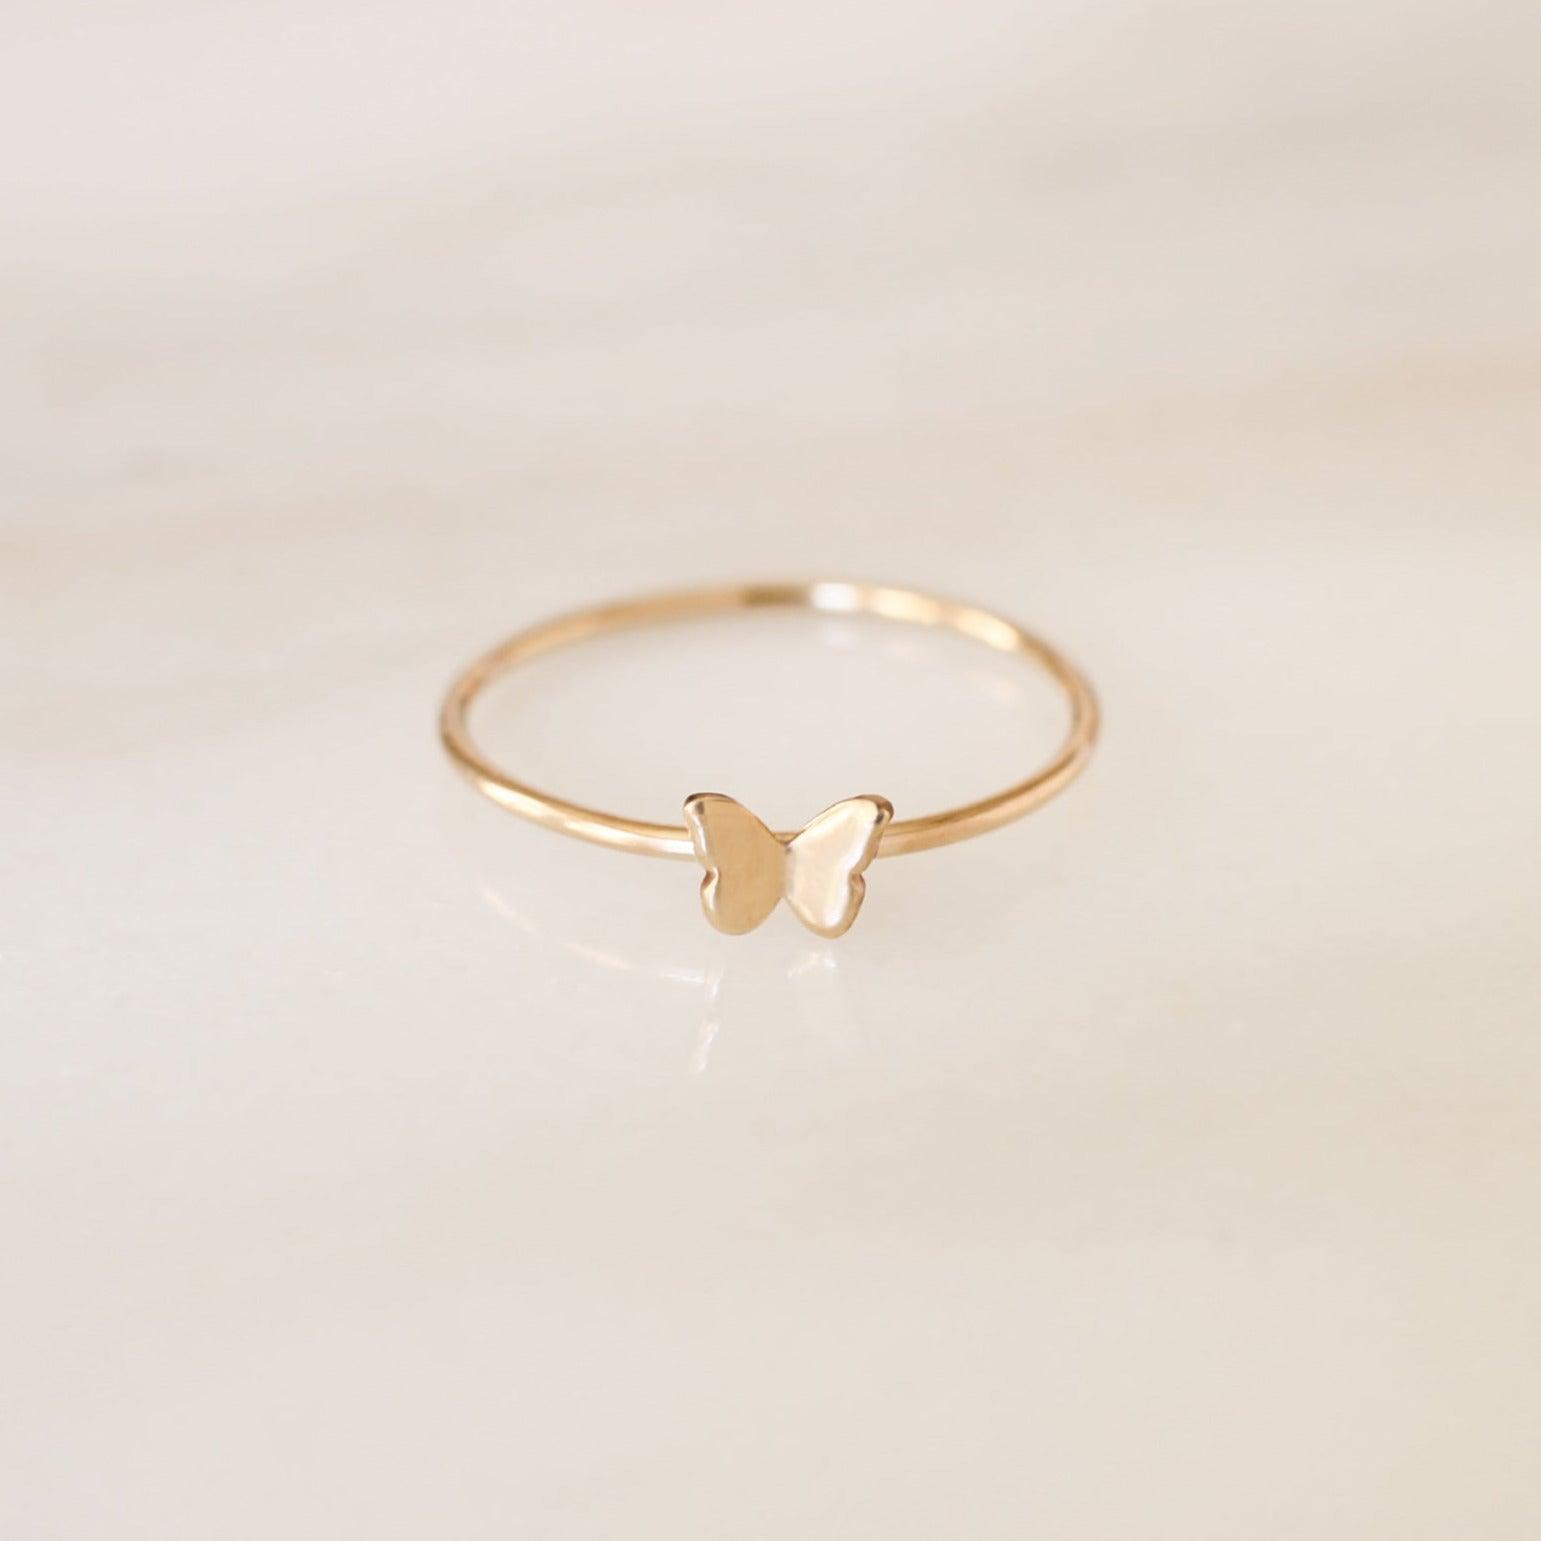 Tiny Butterfly Ring - Nolia Jewelry - Meaningful + Sustainably Handcrafted Jewelry